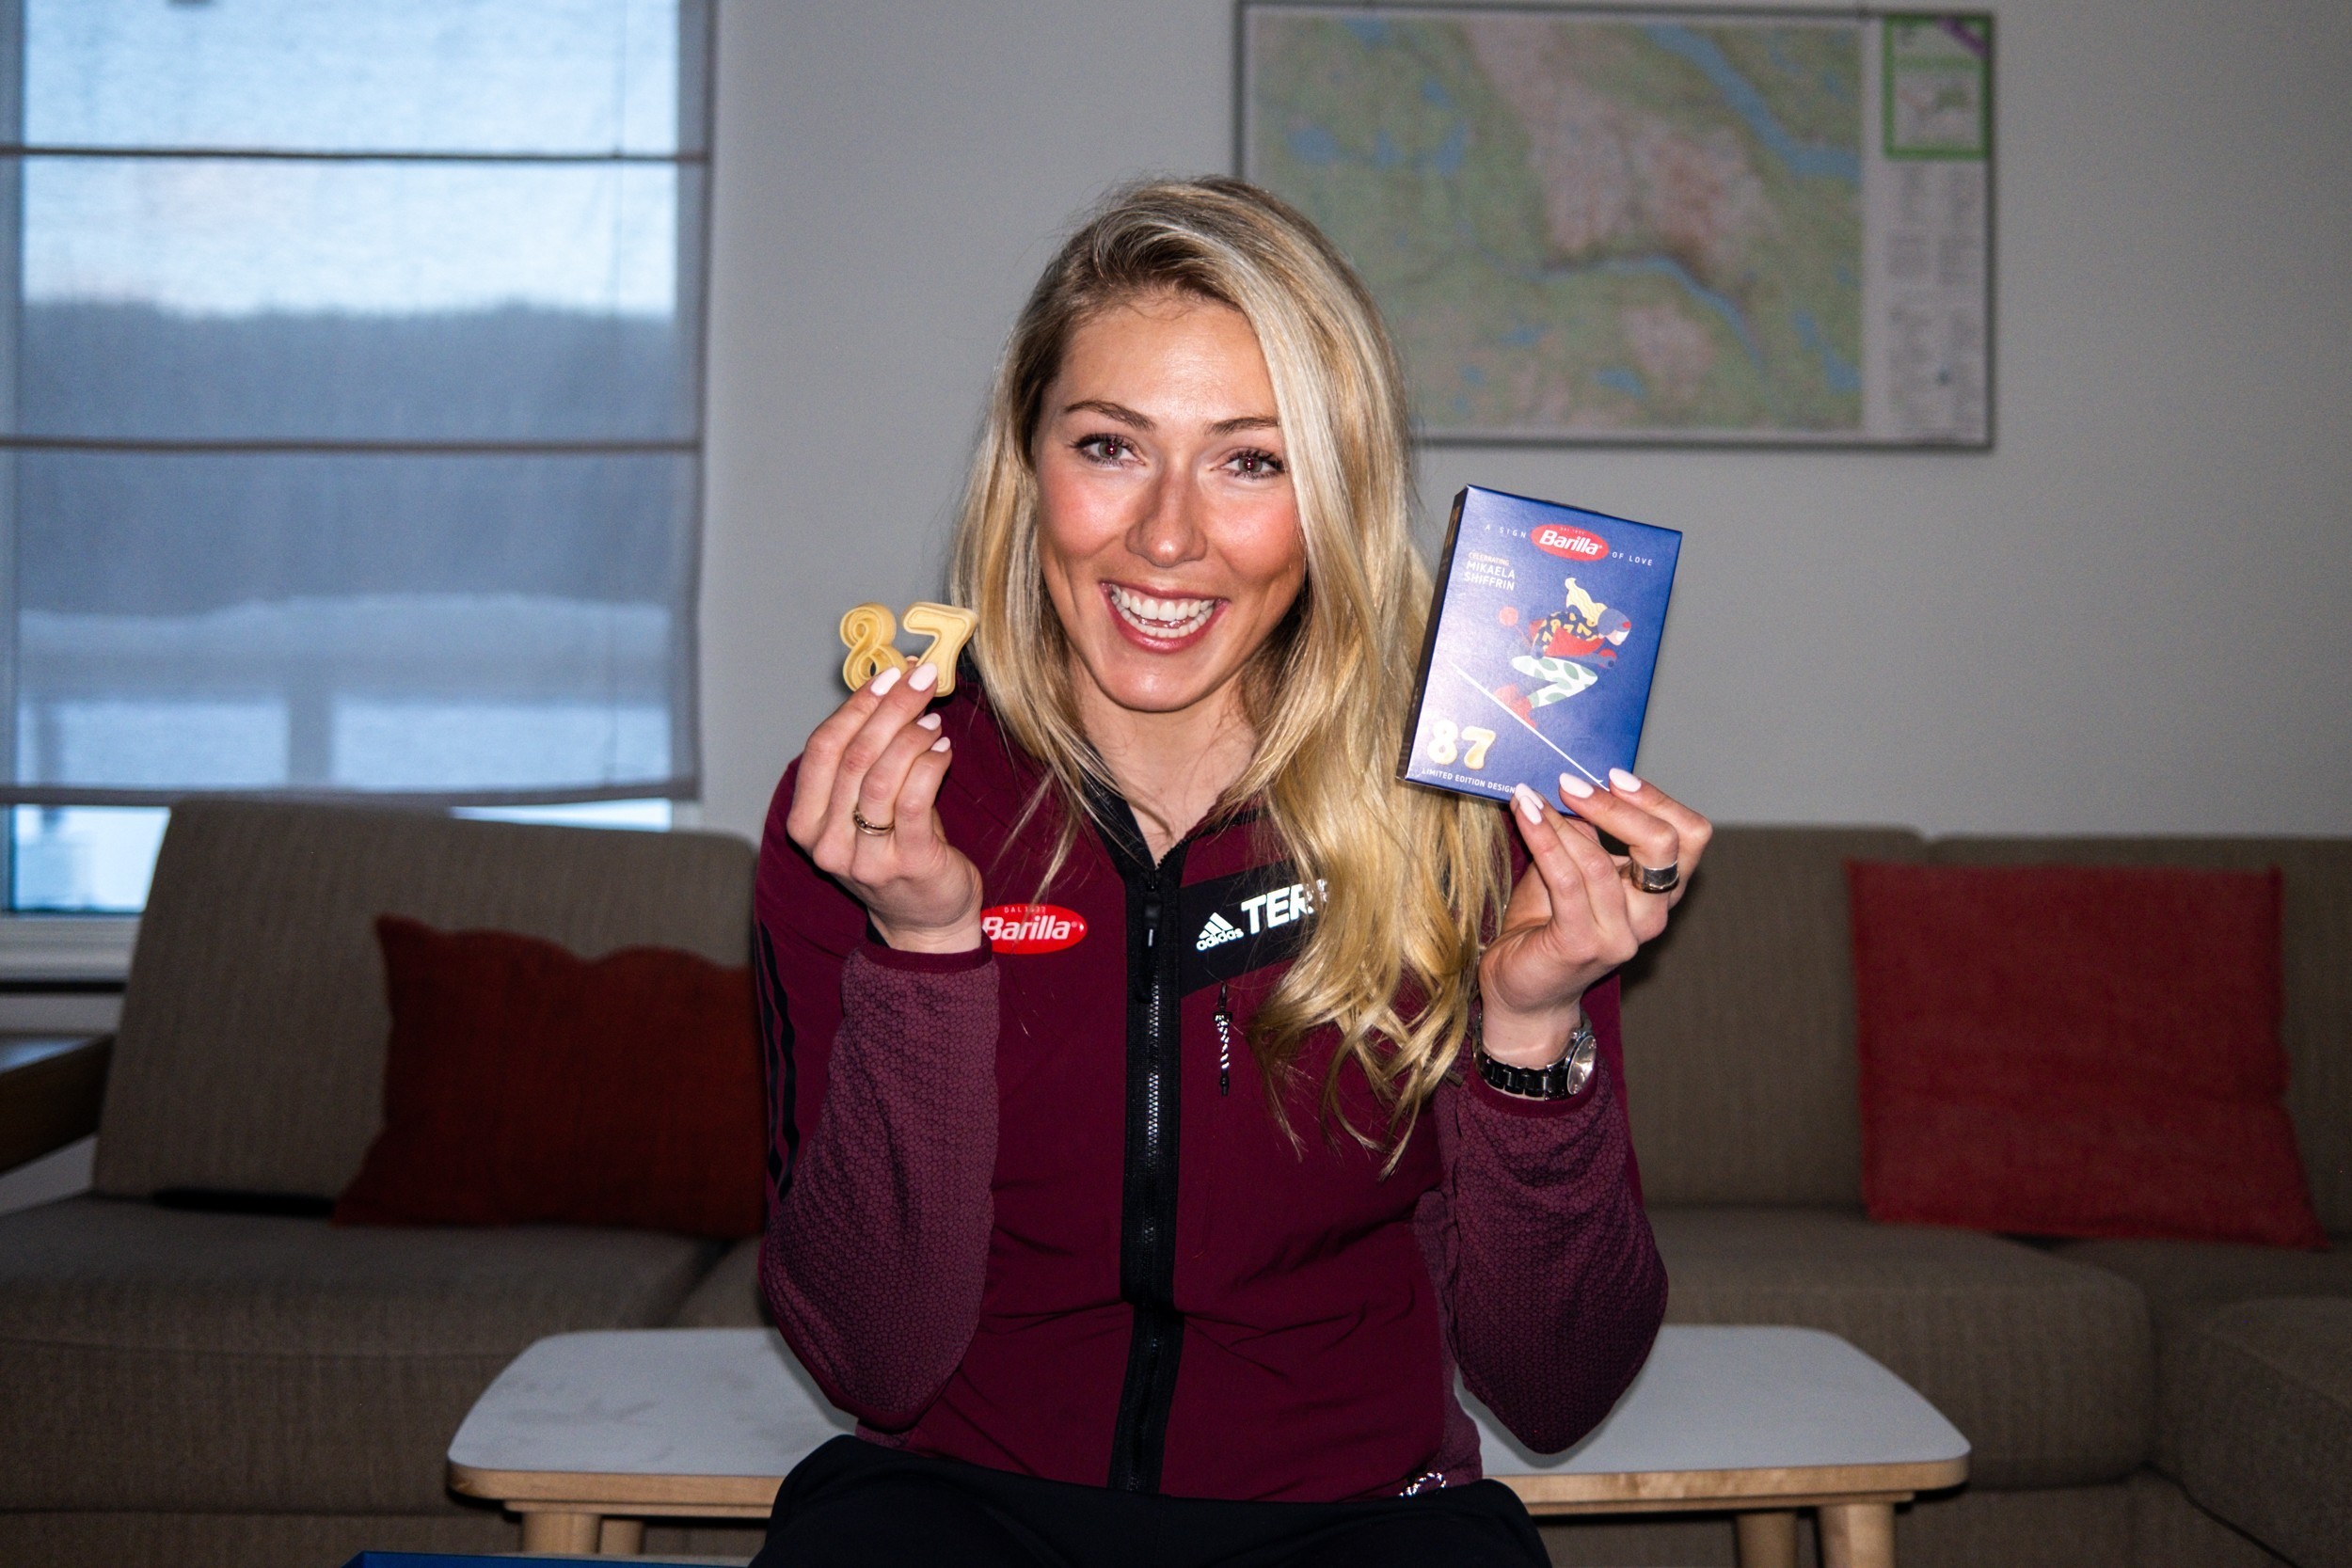 Barilla & Mikaela Shiffrin: Greatness starts with a great recipe - Pack No. 39